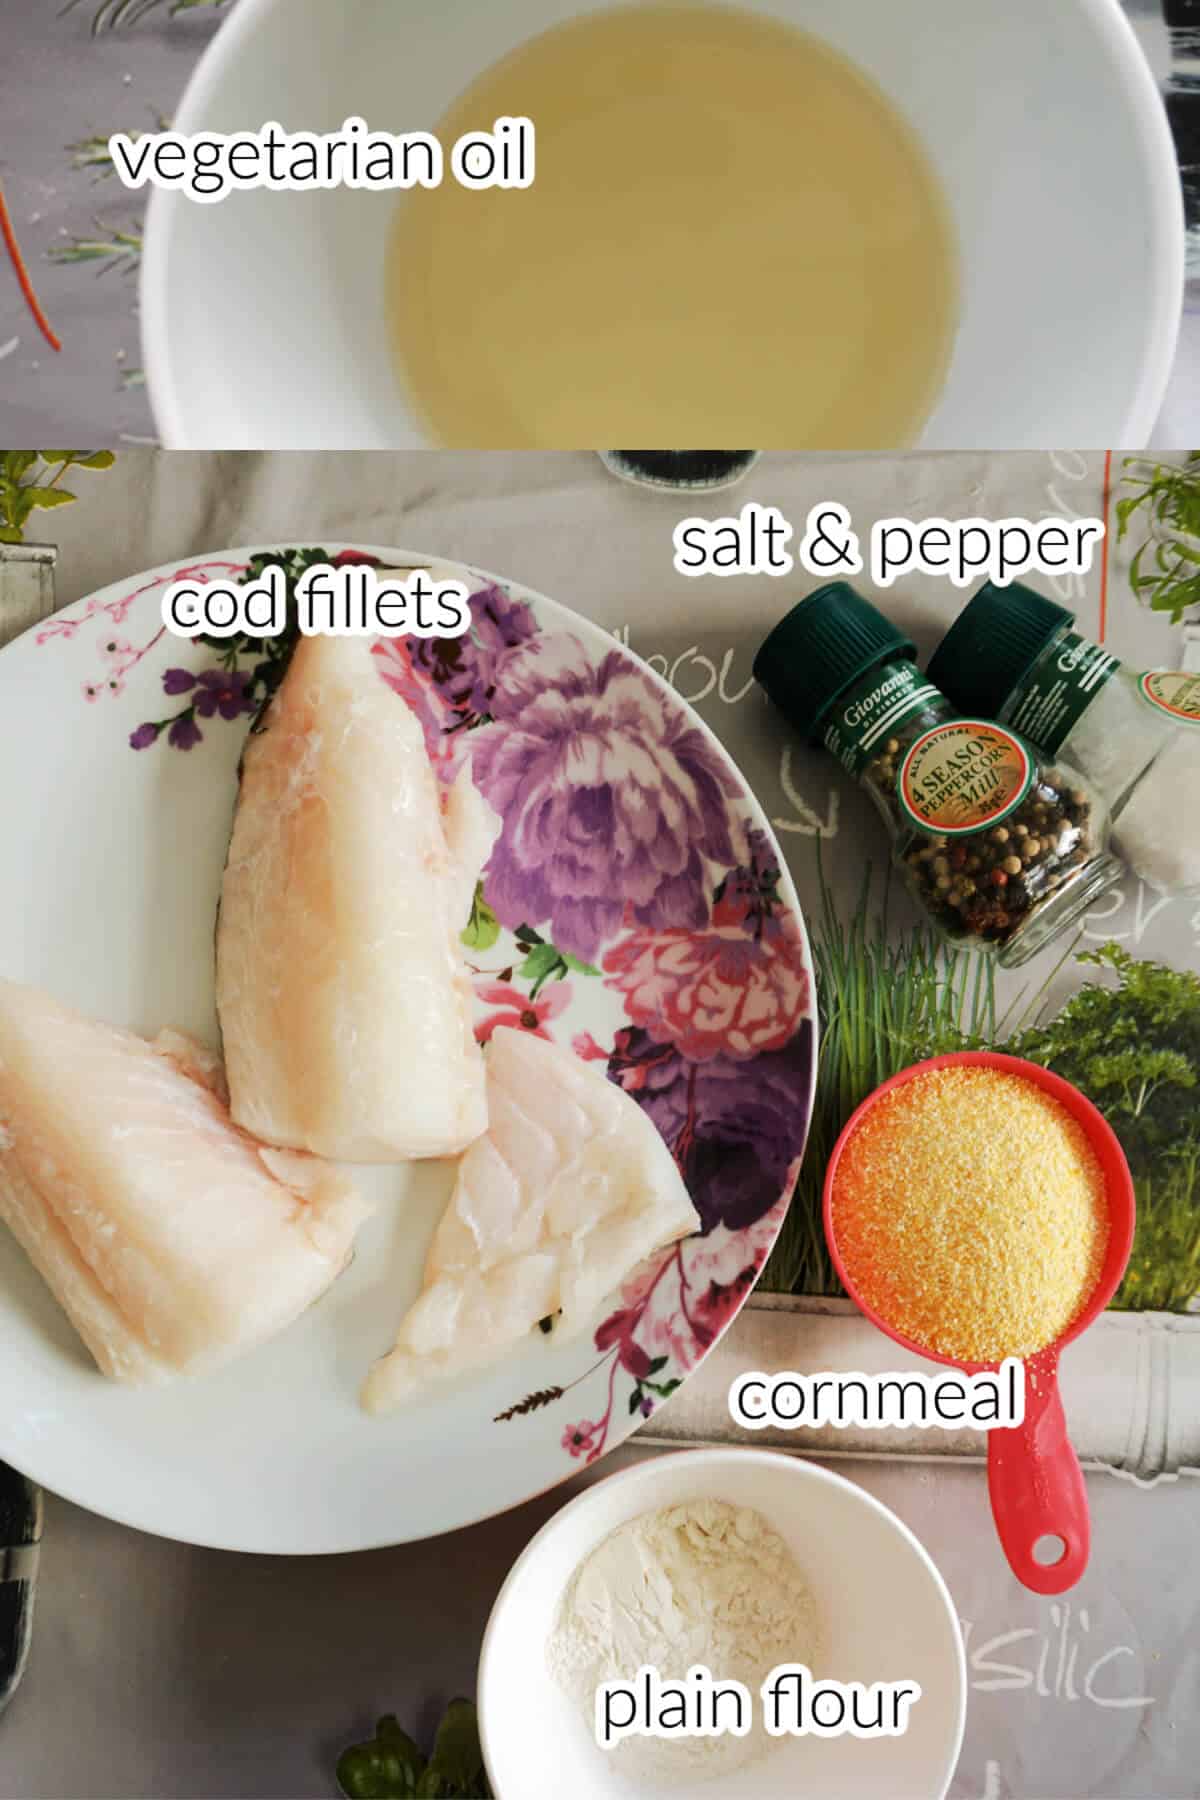 Ingredients needed to make fried fish with cornmeal.